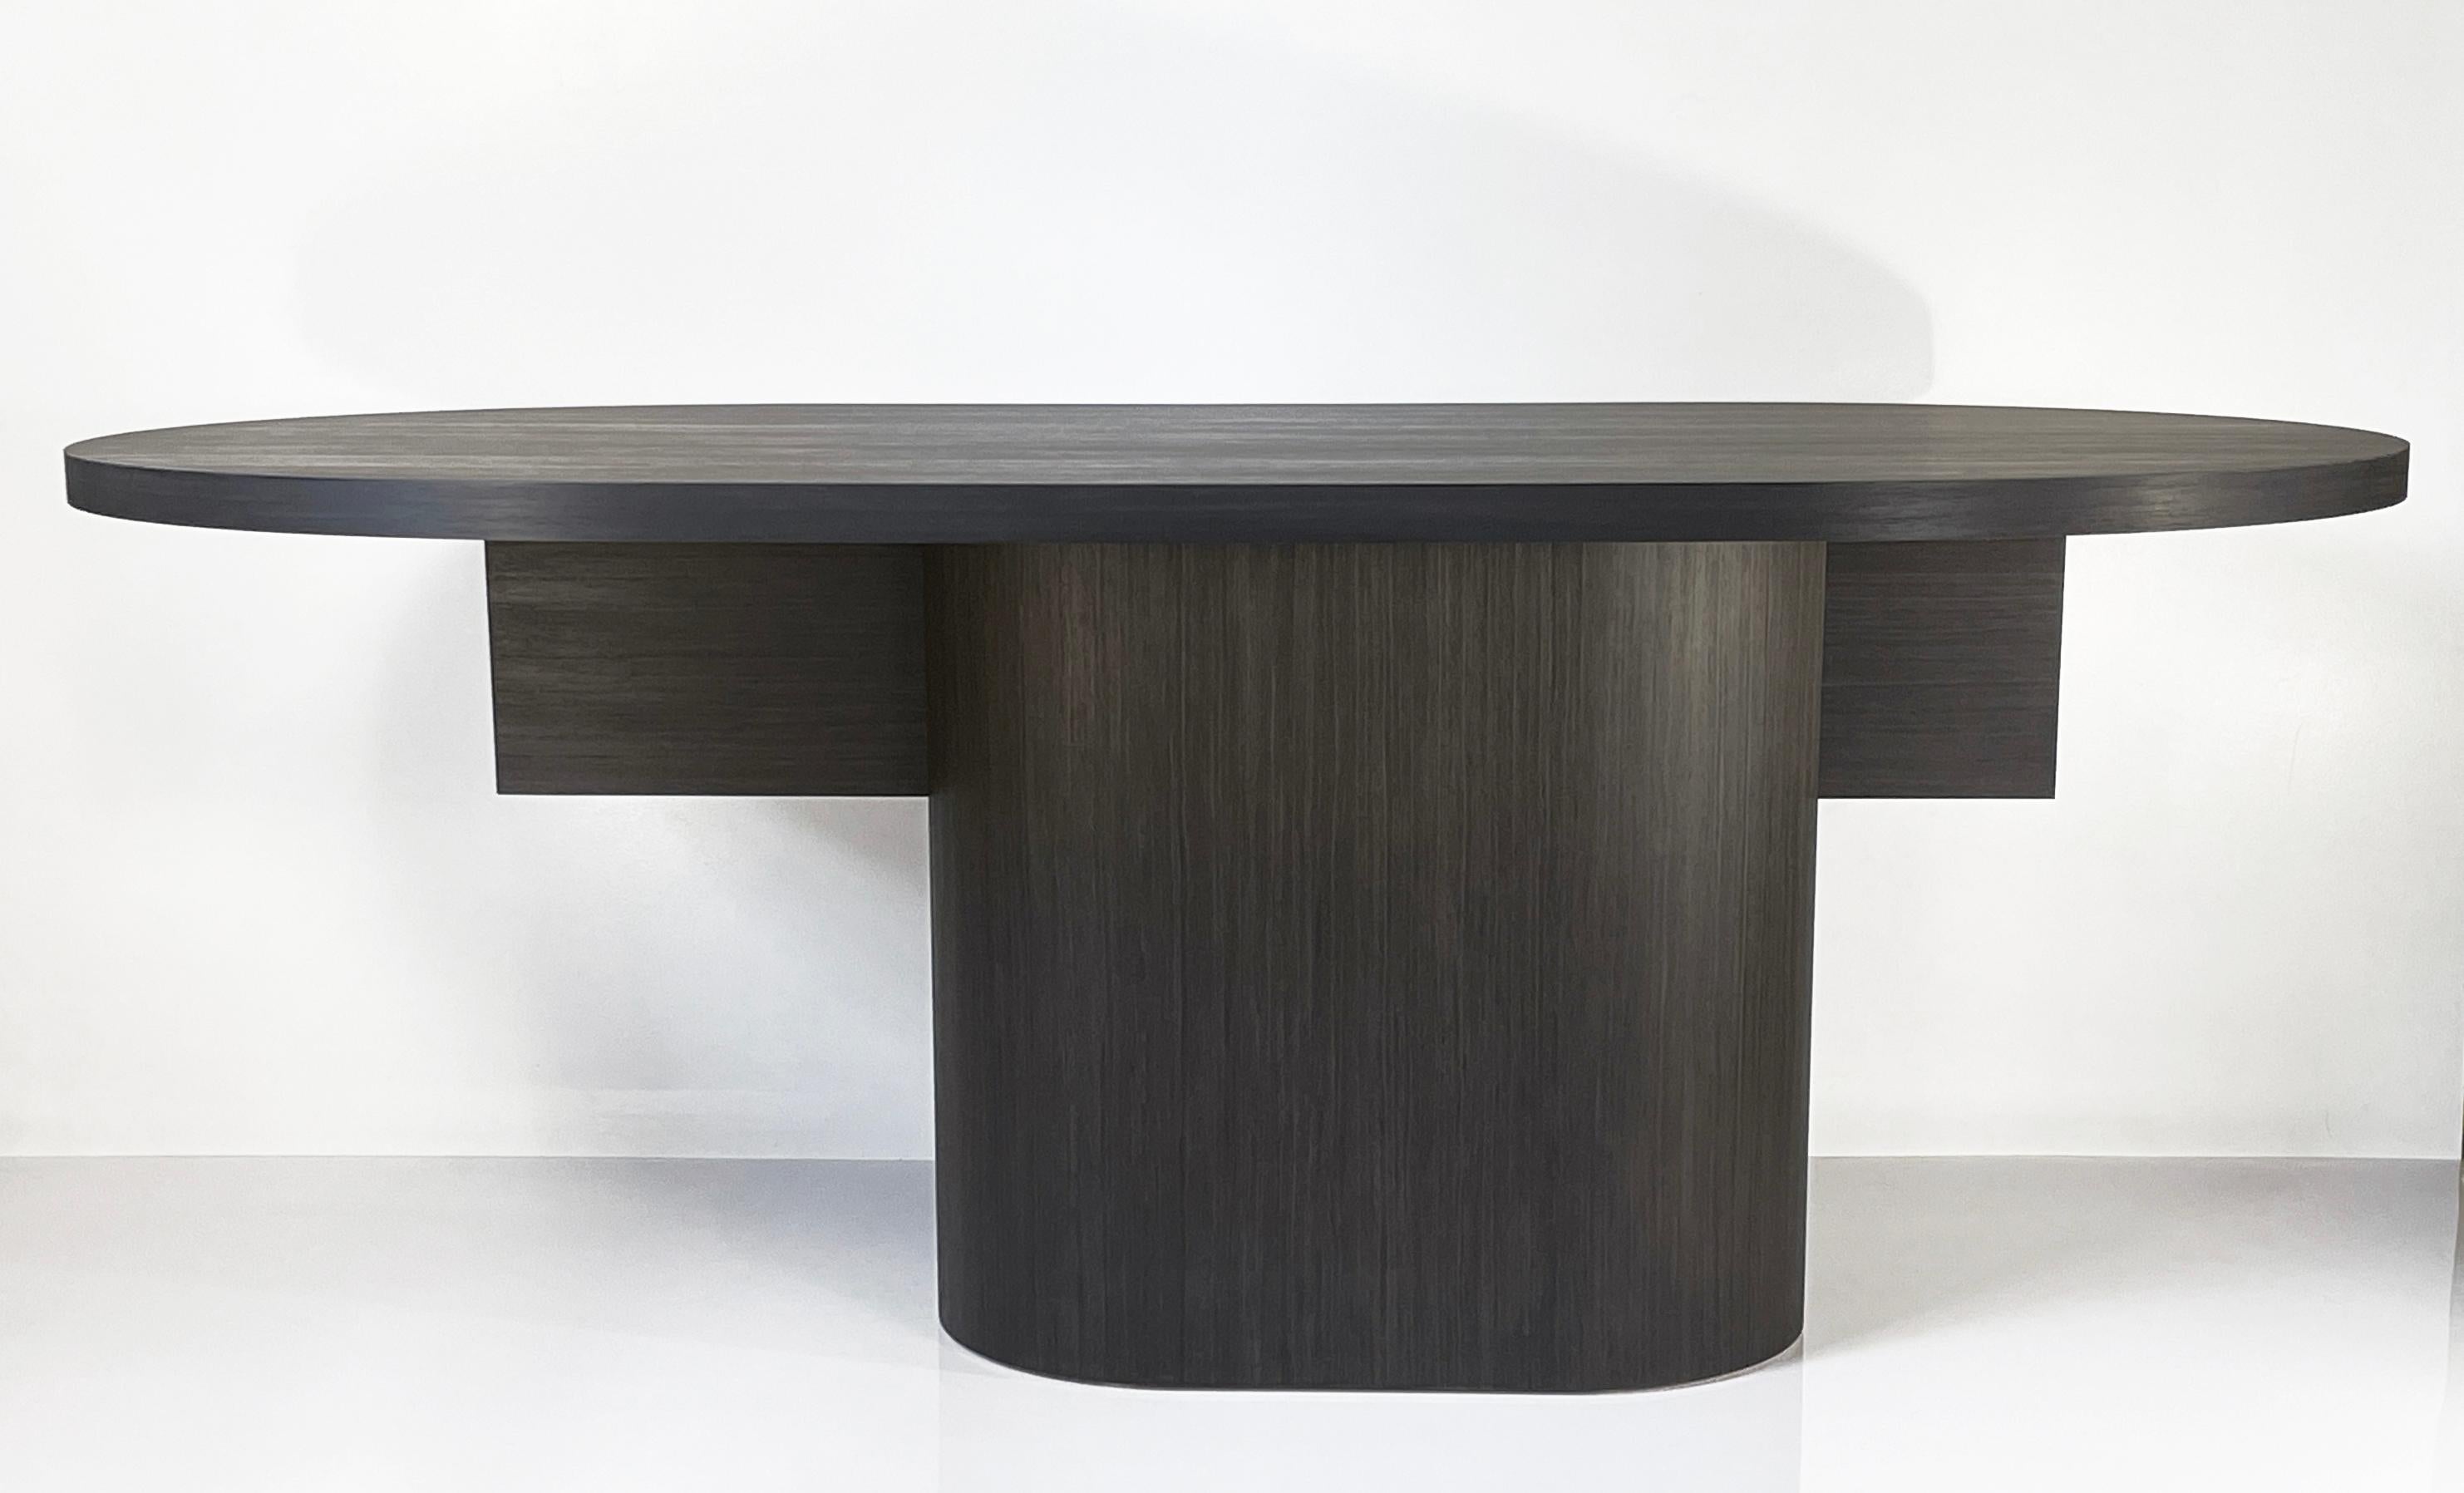 Sebring is William Earle's new and most versatile design yet.
The single elongated pedestal can be expanded to accommodate
virtually any size table top.
The tenon can be enlarged also, and the pedestal and tenon can be symmetrically or